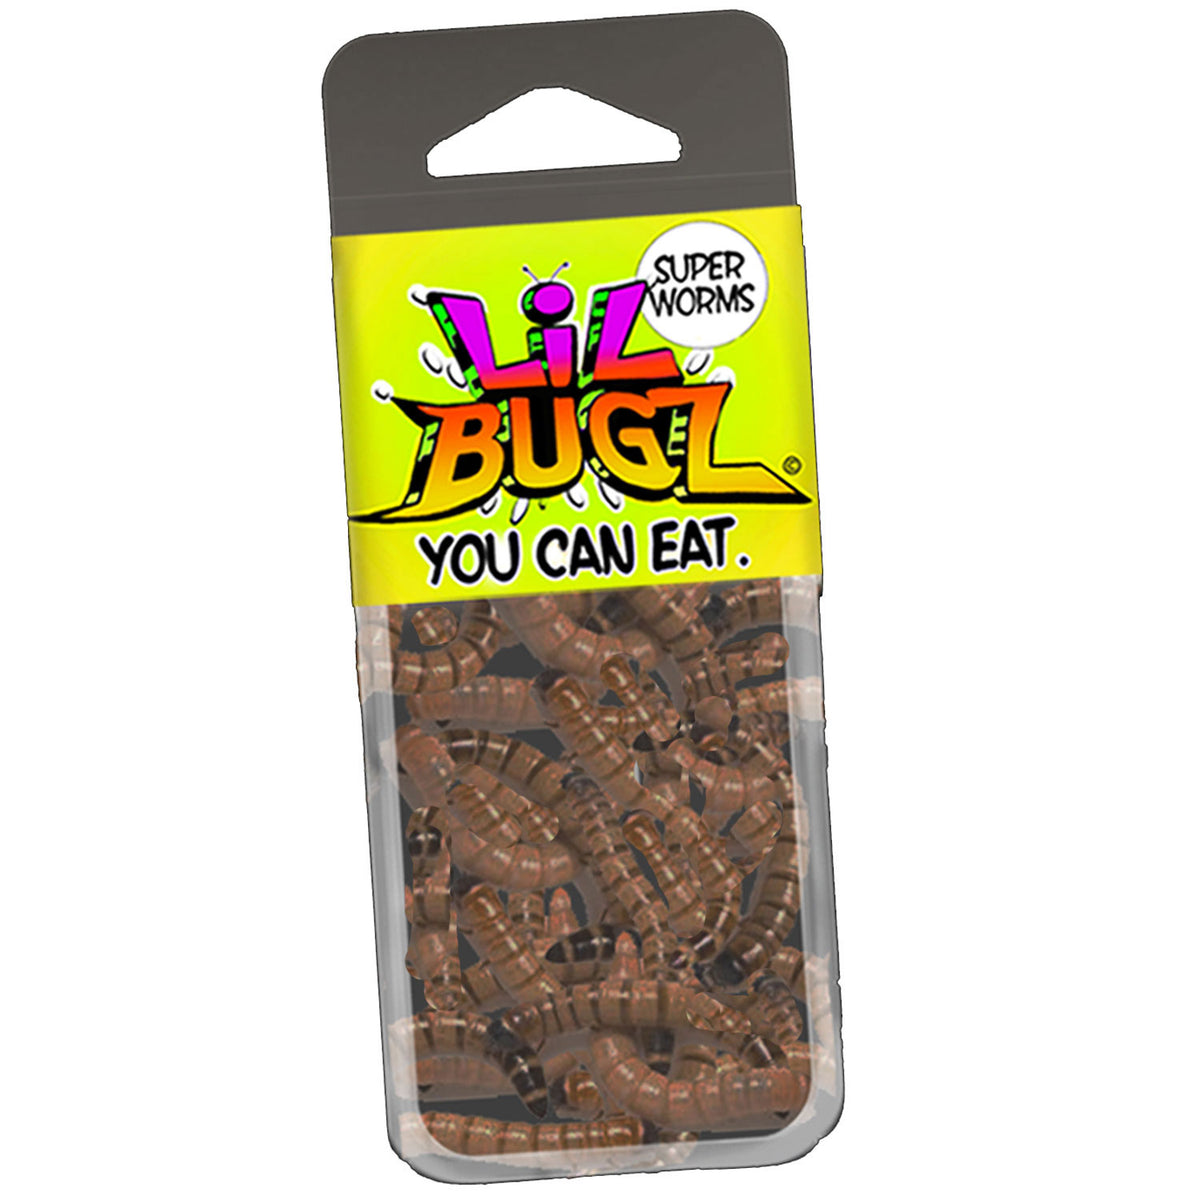 Lil Bugz You Can Eat  Edible Super Worms – You Can Eat Bugs